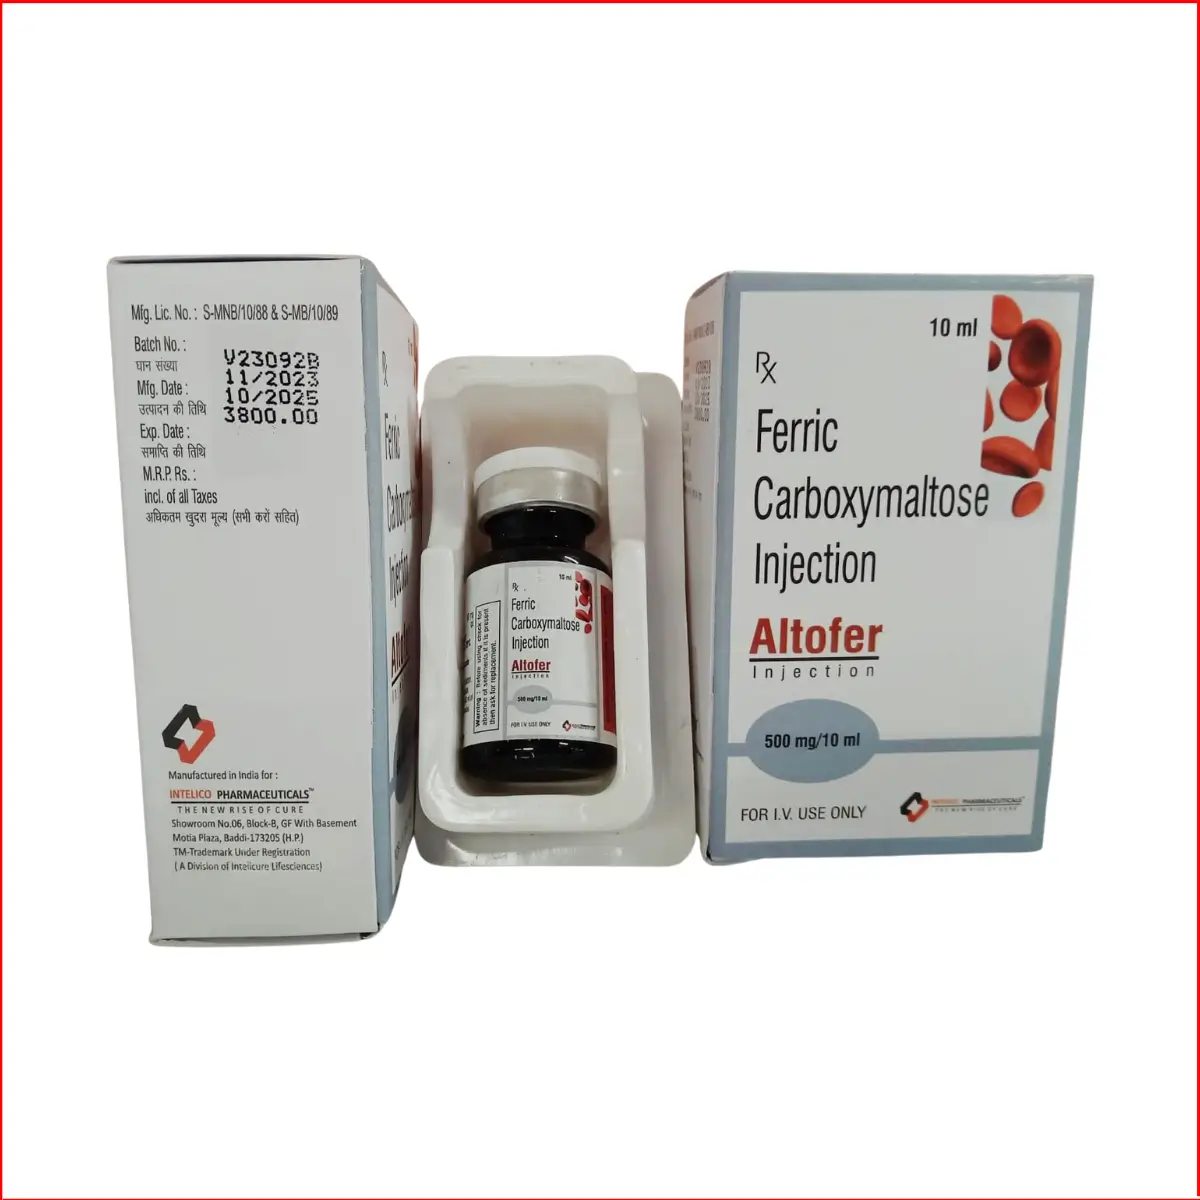 Ferric carboxymoltose injection